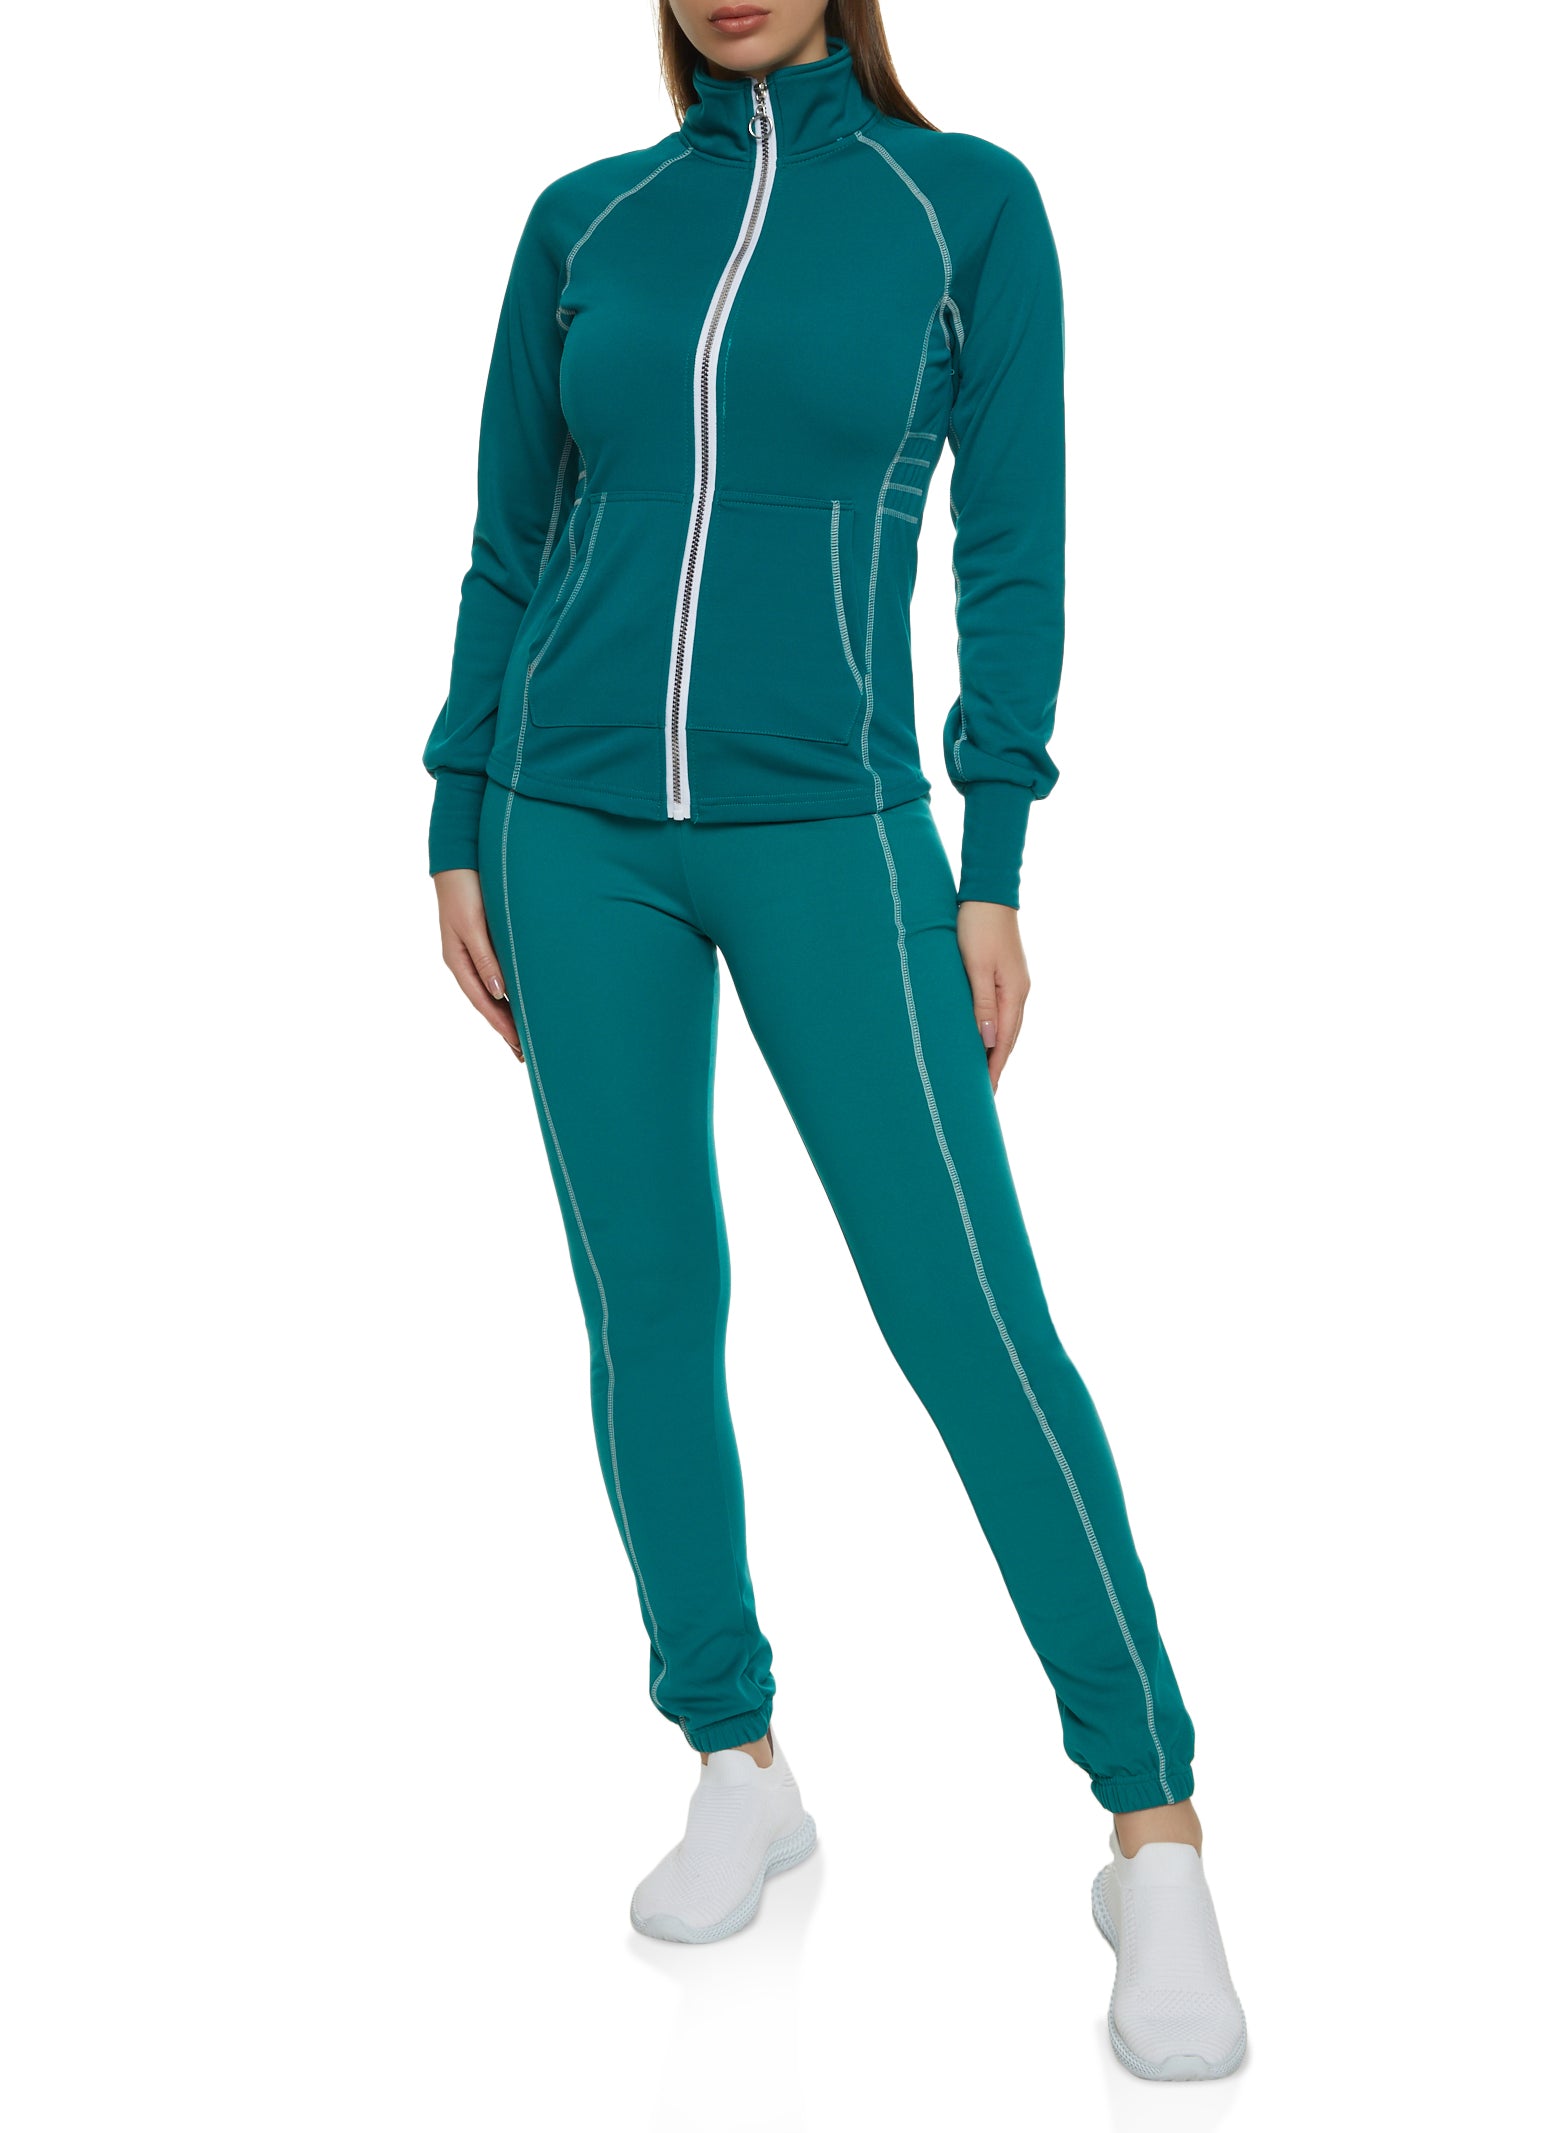 Contrast Piping Zip Up Track Jacket - Teal